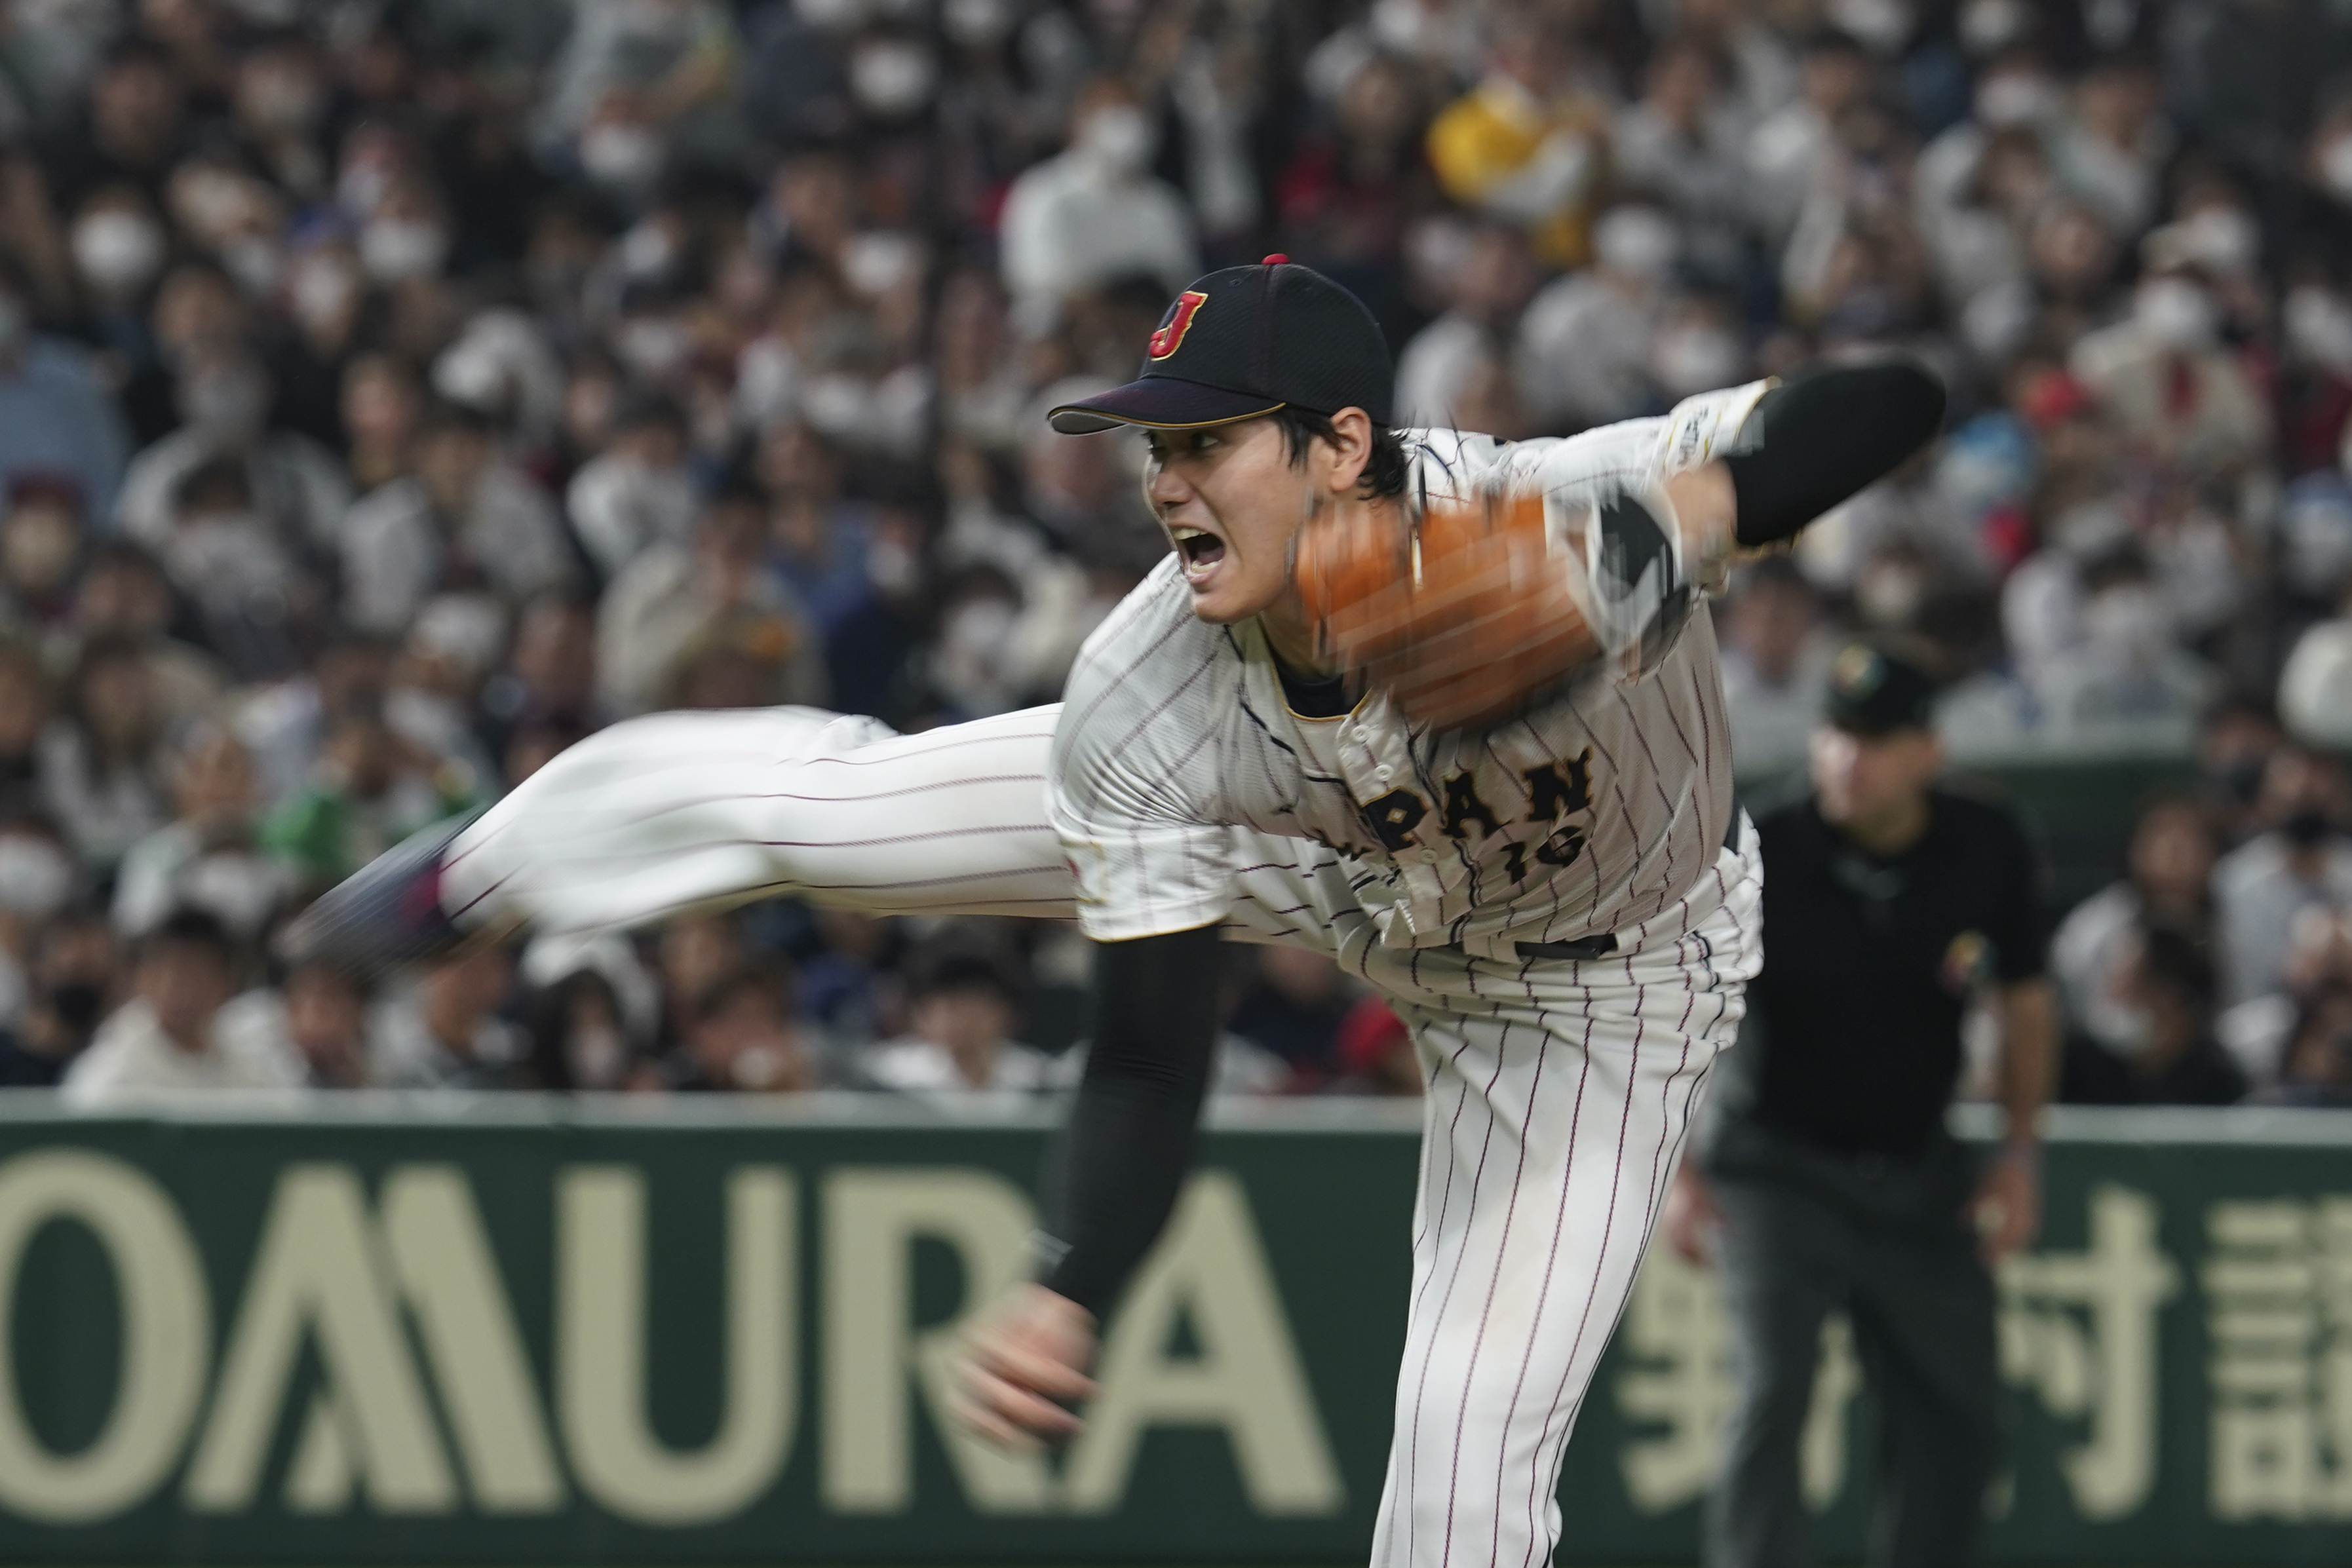 Dreamy Suite Inspired by Japanese Superstars Shohei Ohtani and Yu Darvish  Leaves Baseball Fans Flat - EssentiallySports